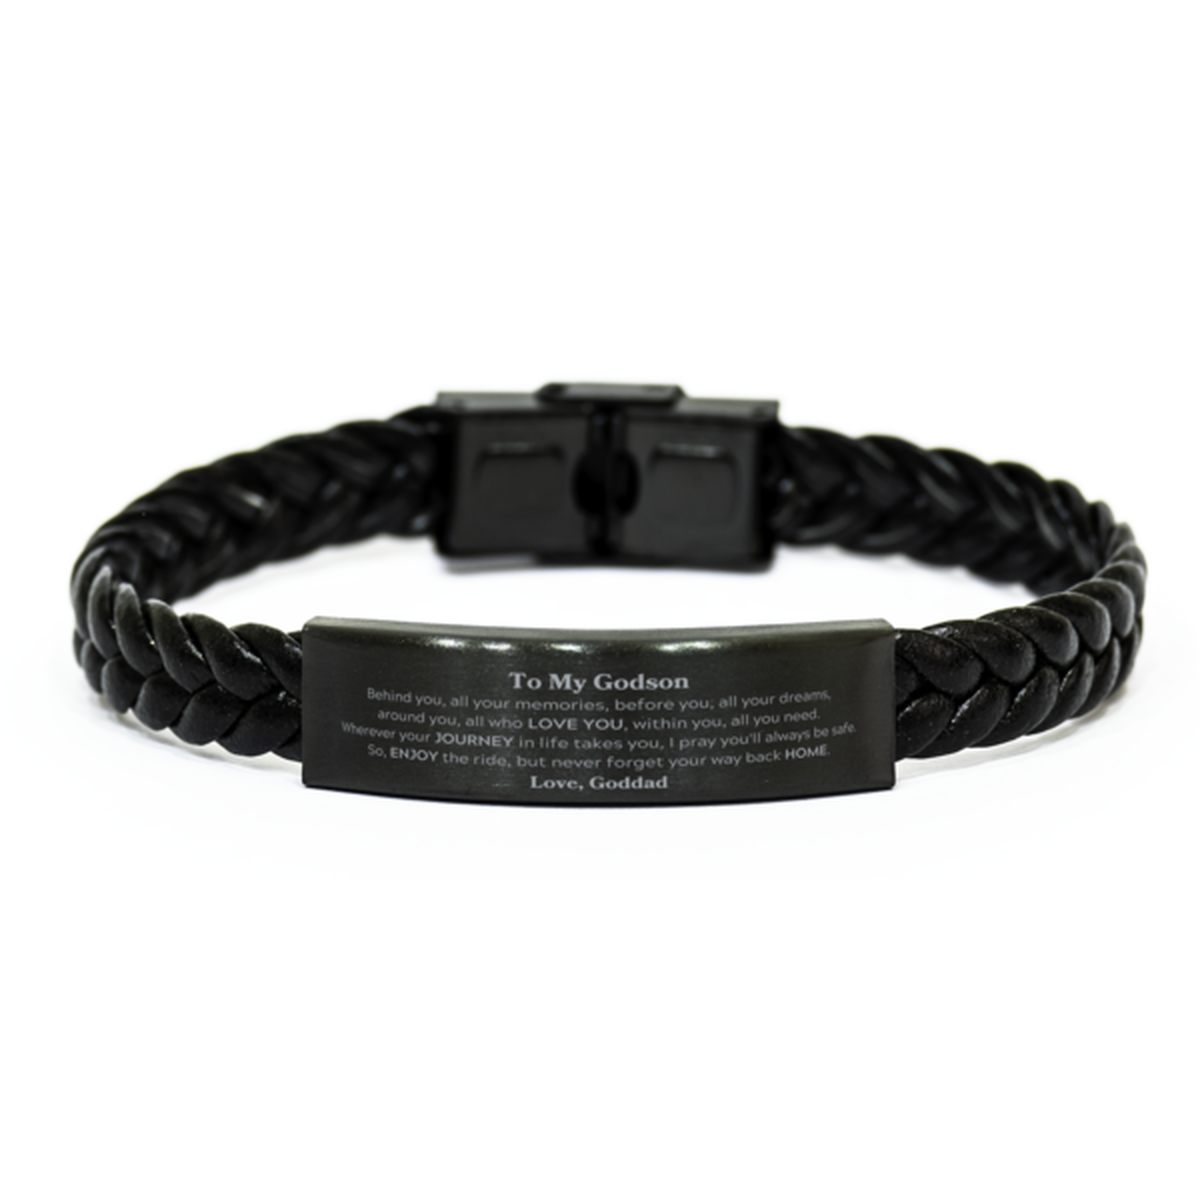 To My Godson Graduation Gifts from Goddad, Godson Braided Leather Bracelet Christmas Birthday Gifts for Godson Behind you, all your memories, before you, all your dreams. Love, Goddad